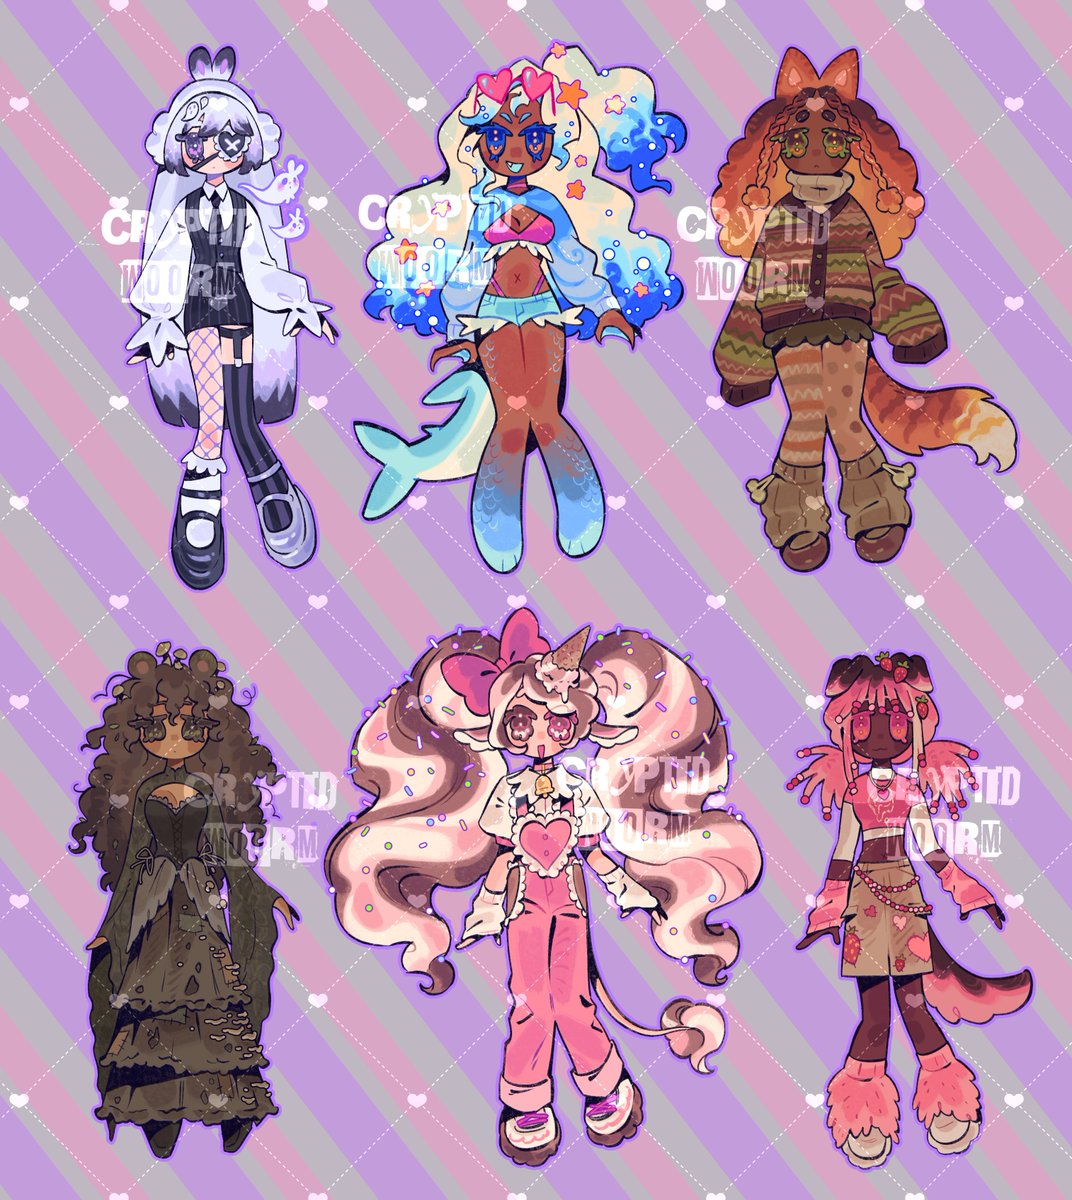 EMERGENCY ADOPTS!! selling these for $80 each! need money for school;; details in thread